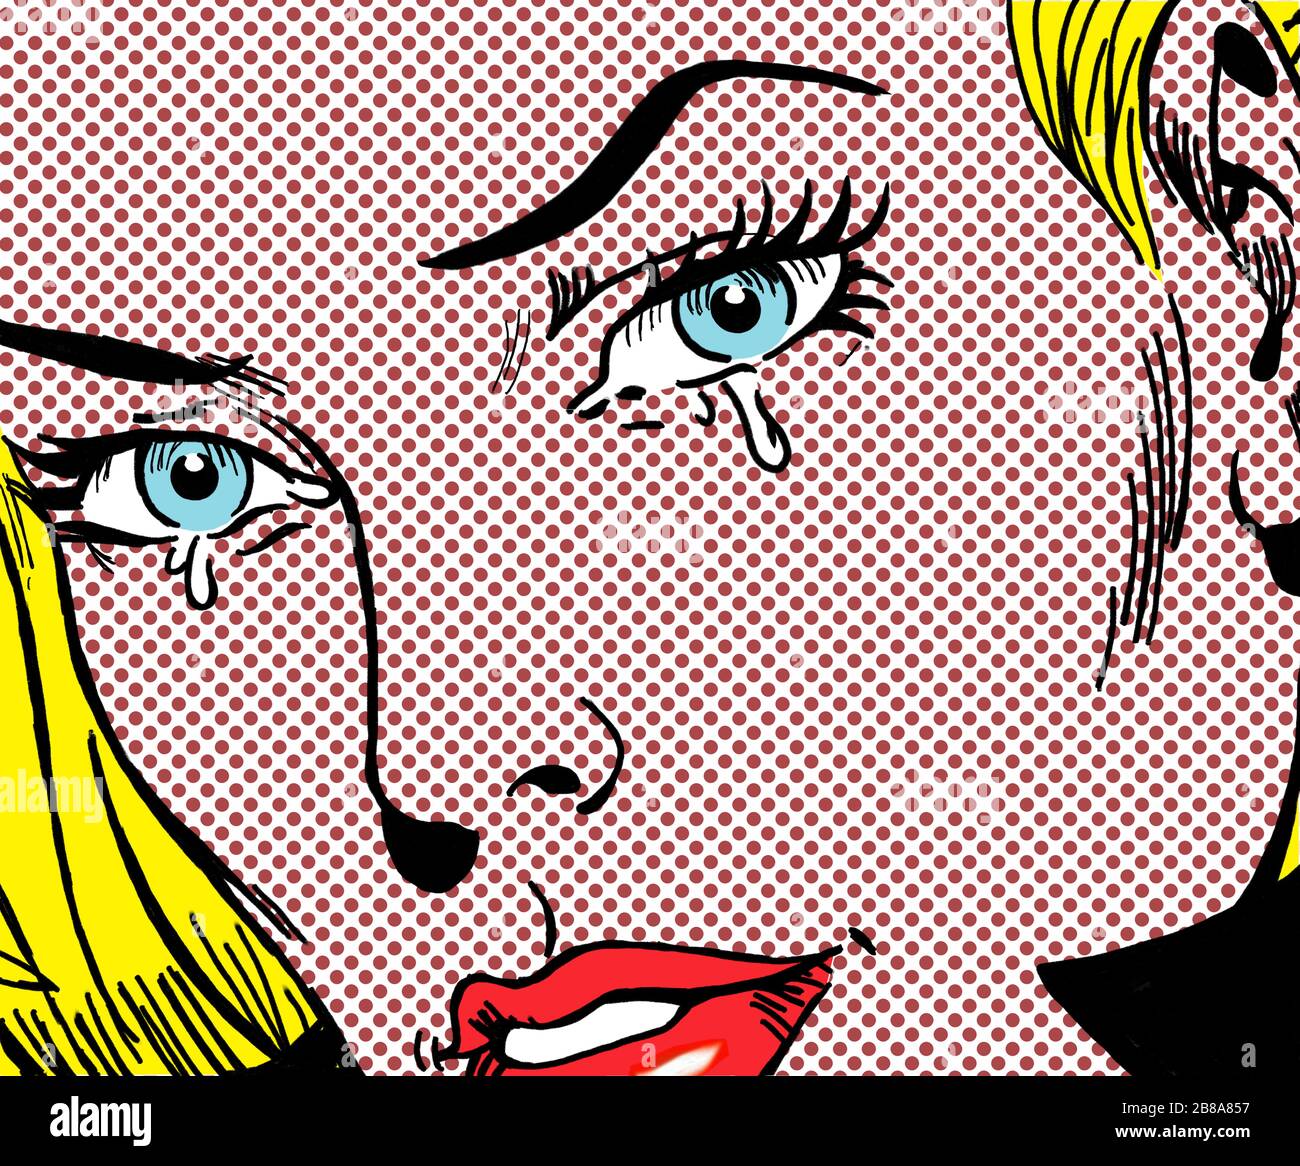 crying woman in the style of 60s comic books, pop art Stock Photo - Alamy